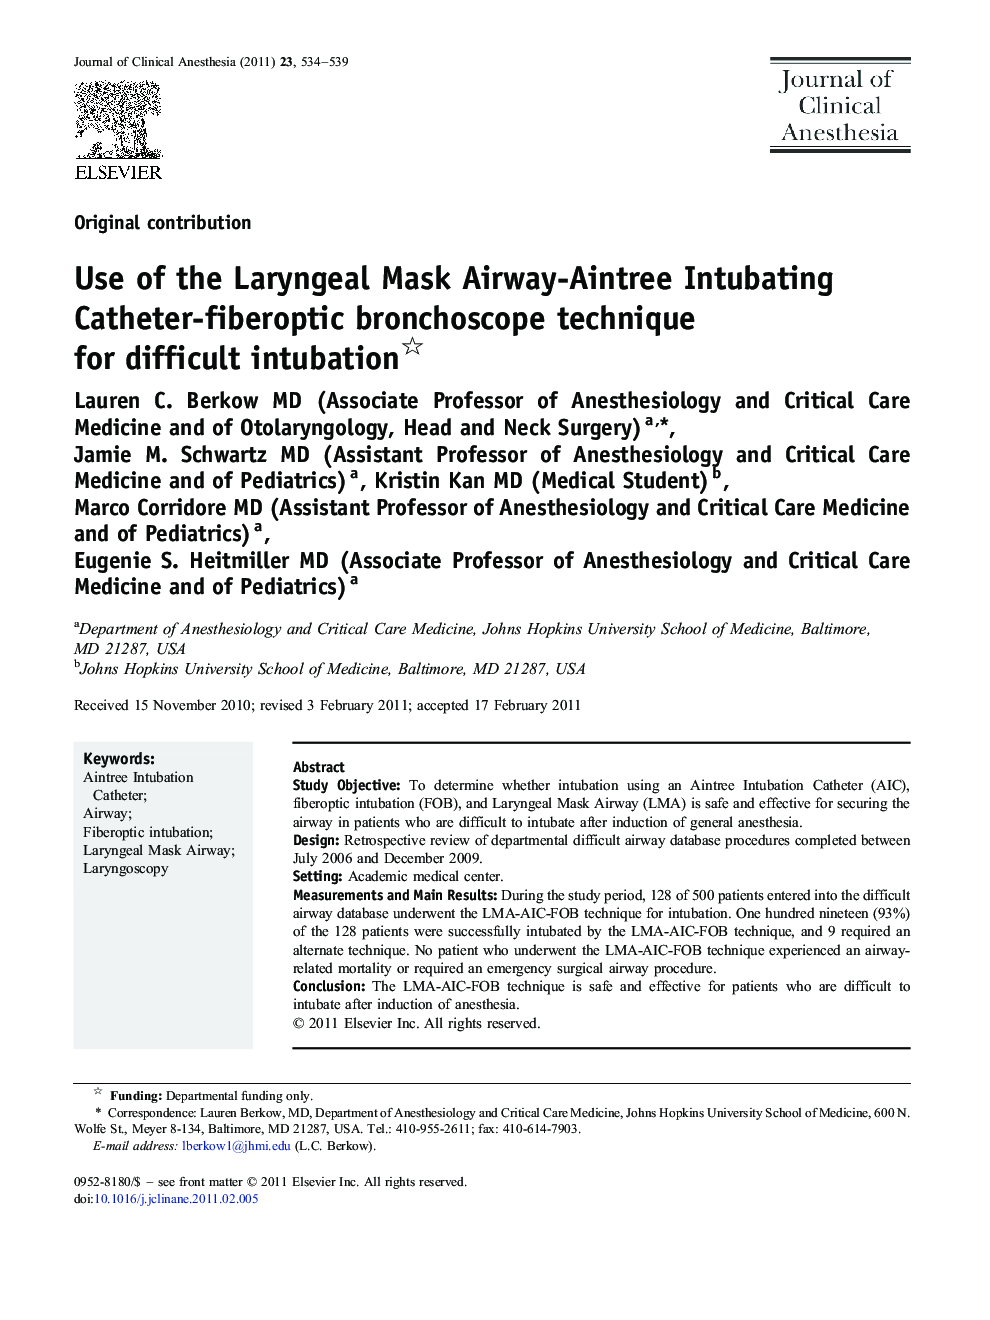 Use of the Laryngeal Mask Airway-Aintree Intubating Catheter-fiberoptic bronchoscope technique for difficult intubation 